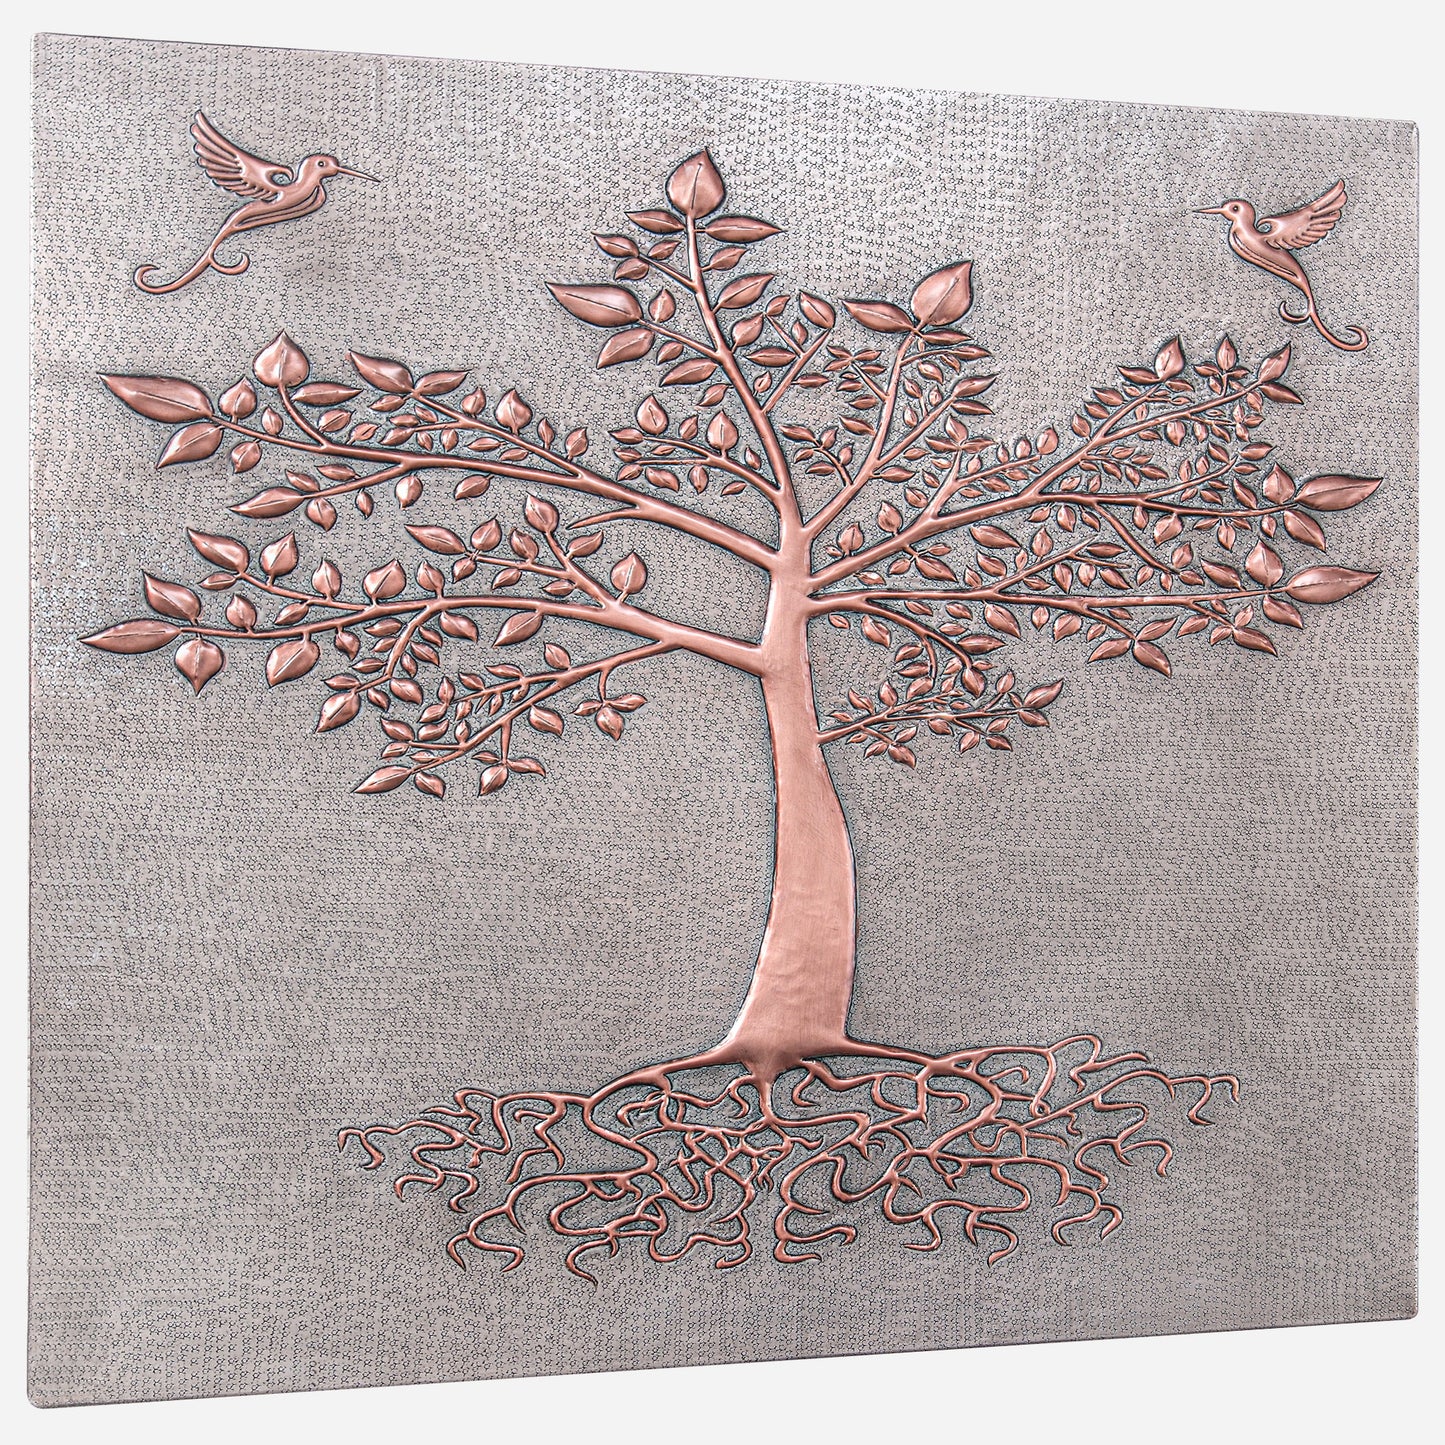 Tree with Roots Kitchen Backsplash Tile - 30"x30" Gray&Copper